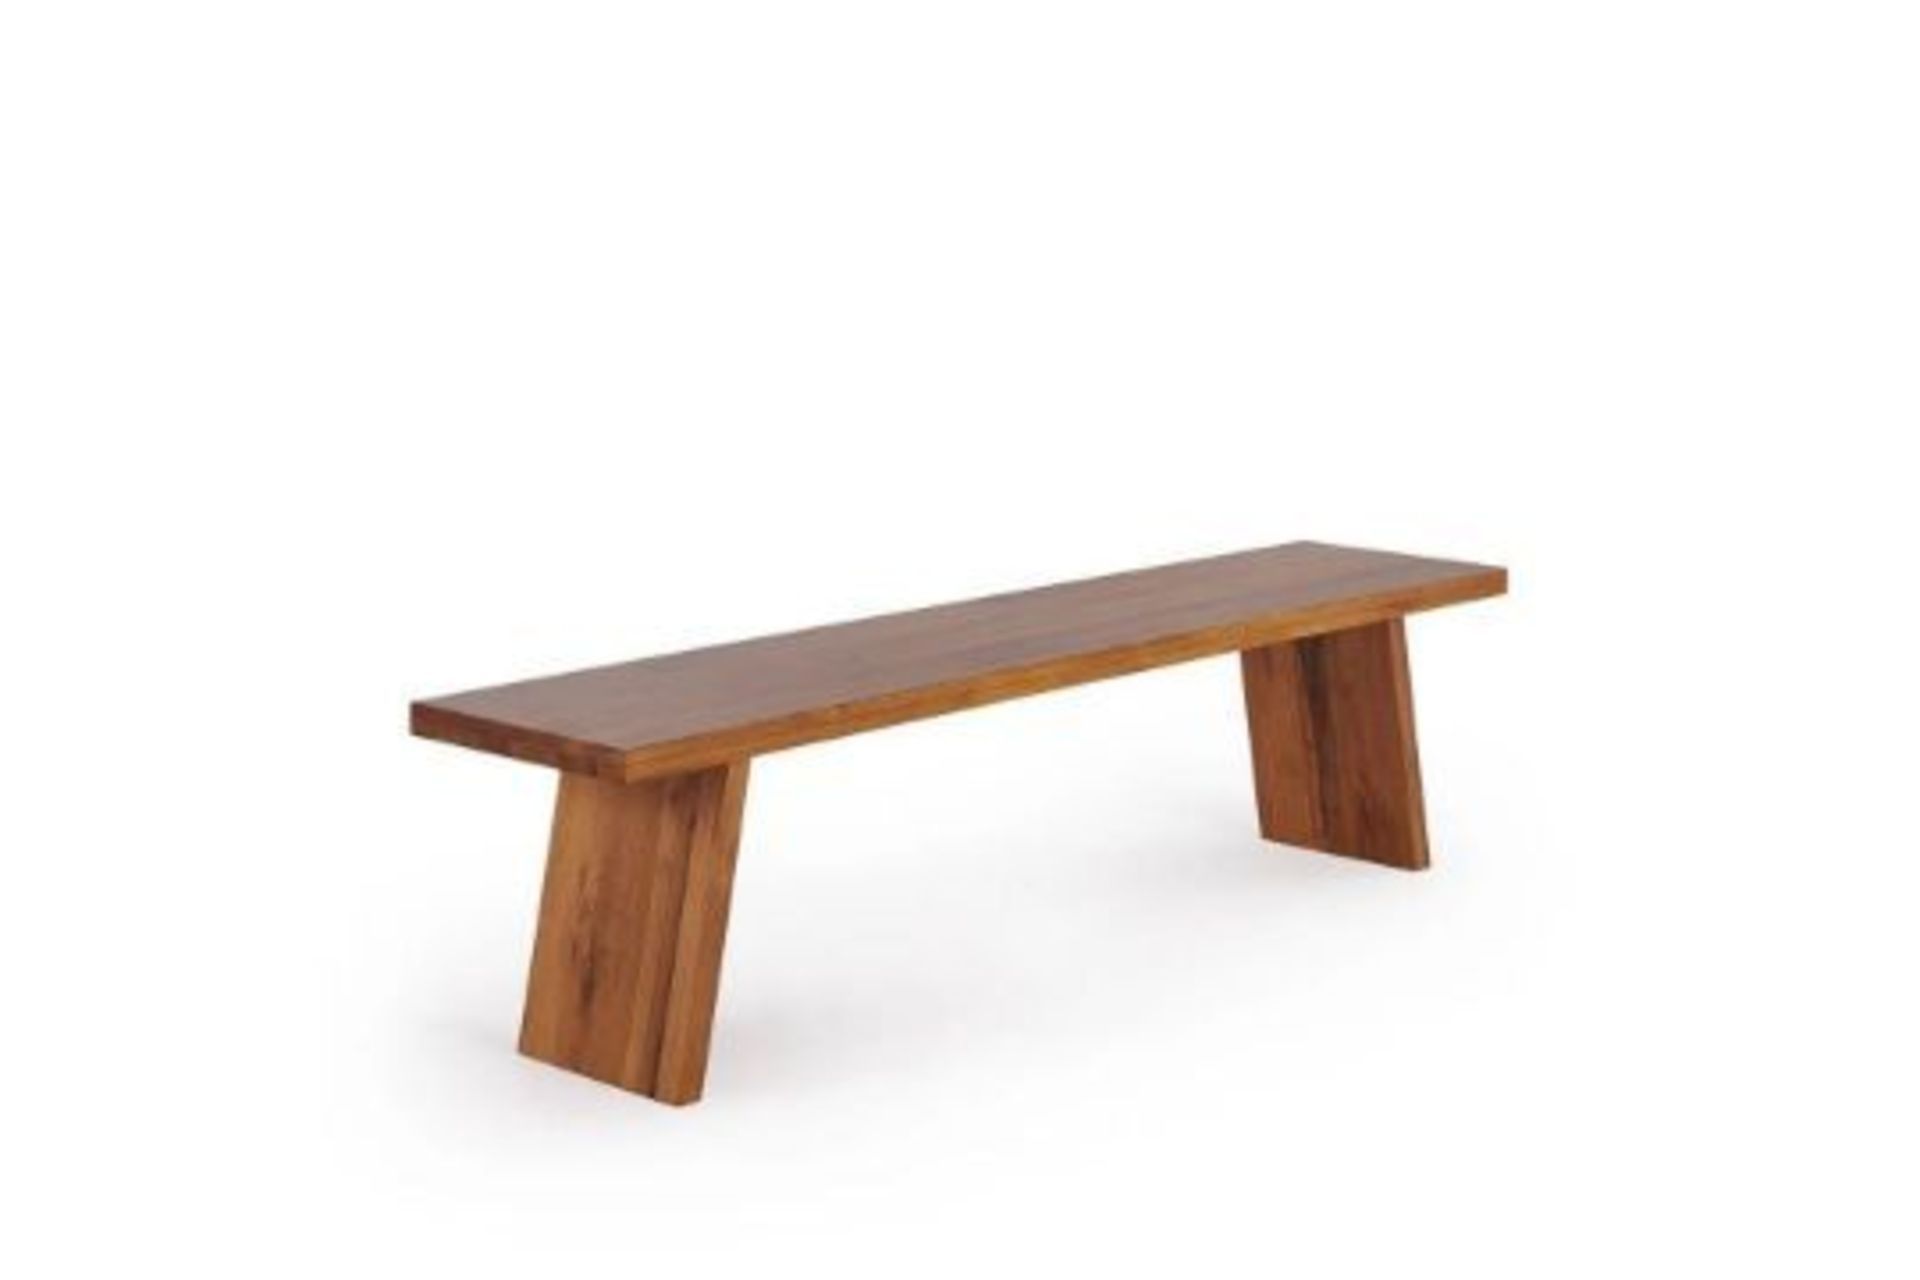 New Boxed - Cantilever Rustic Solid Oak Bench. 180cm Long. RRP £330.. For a more open seating